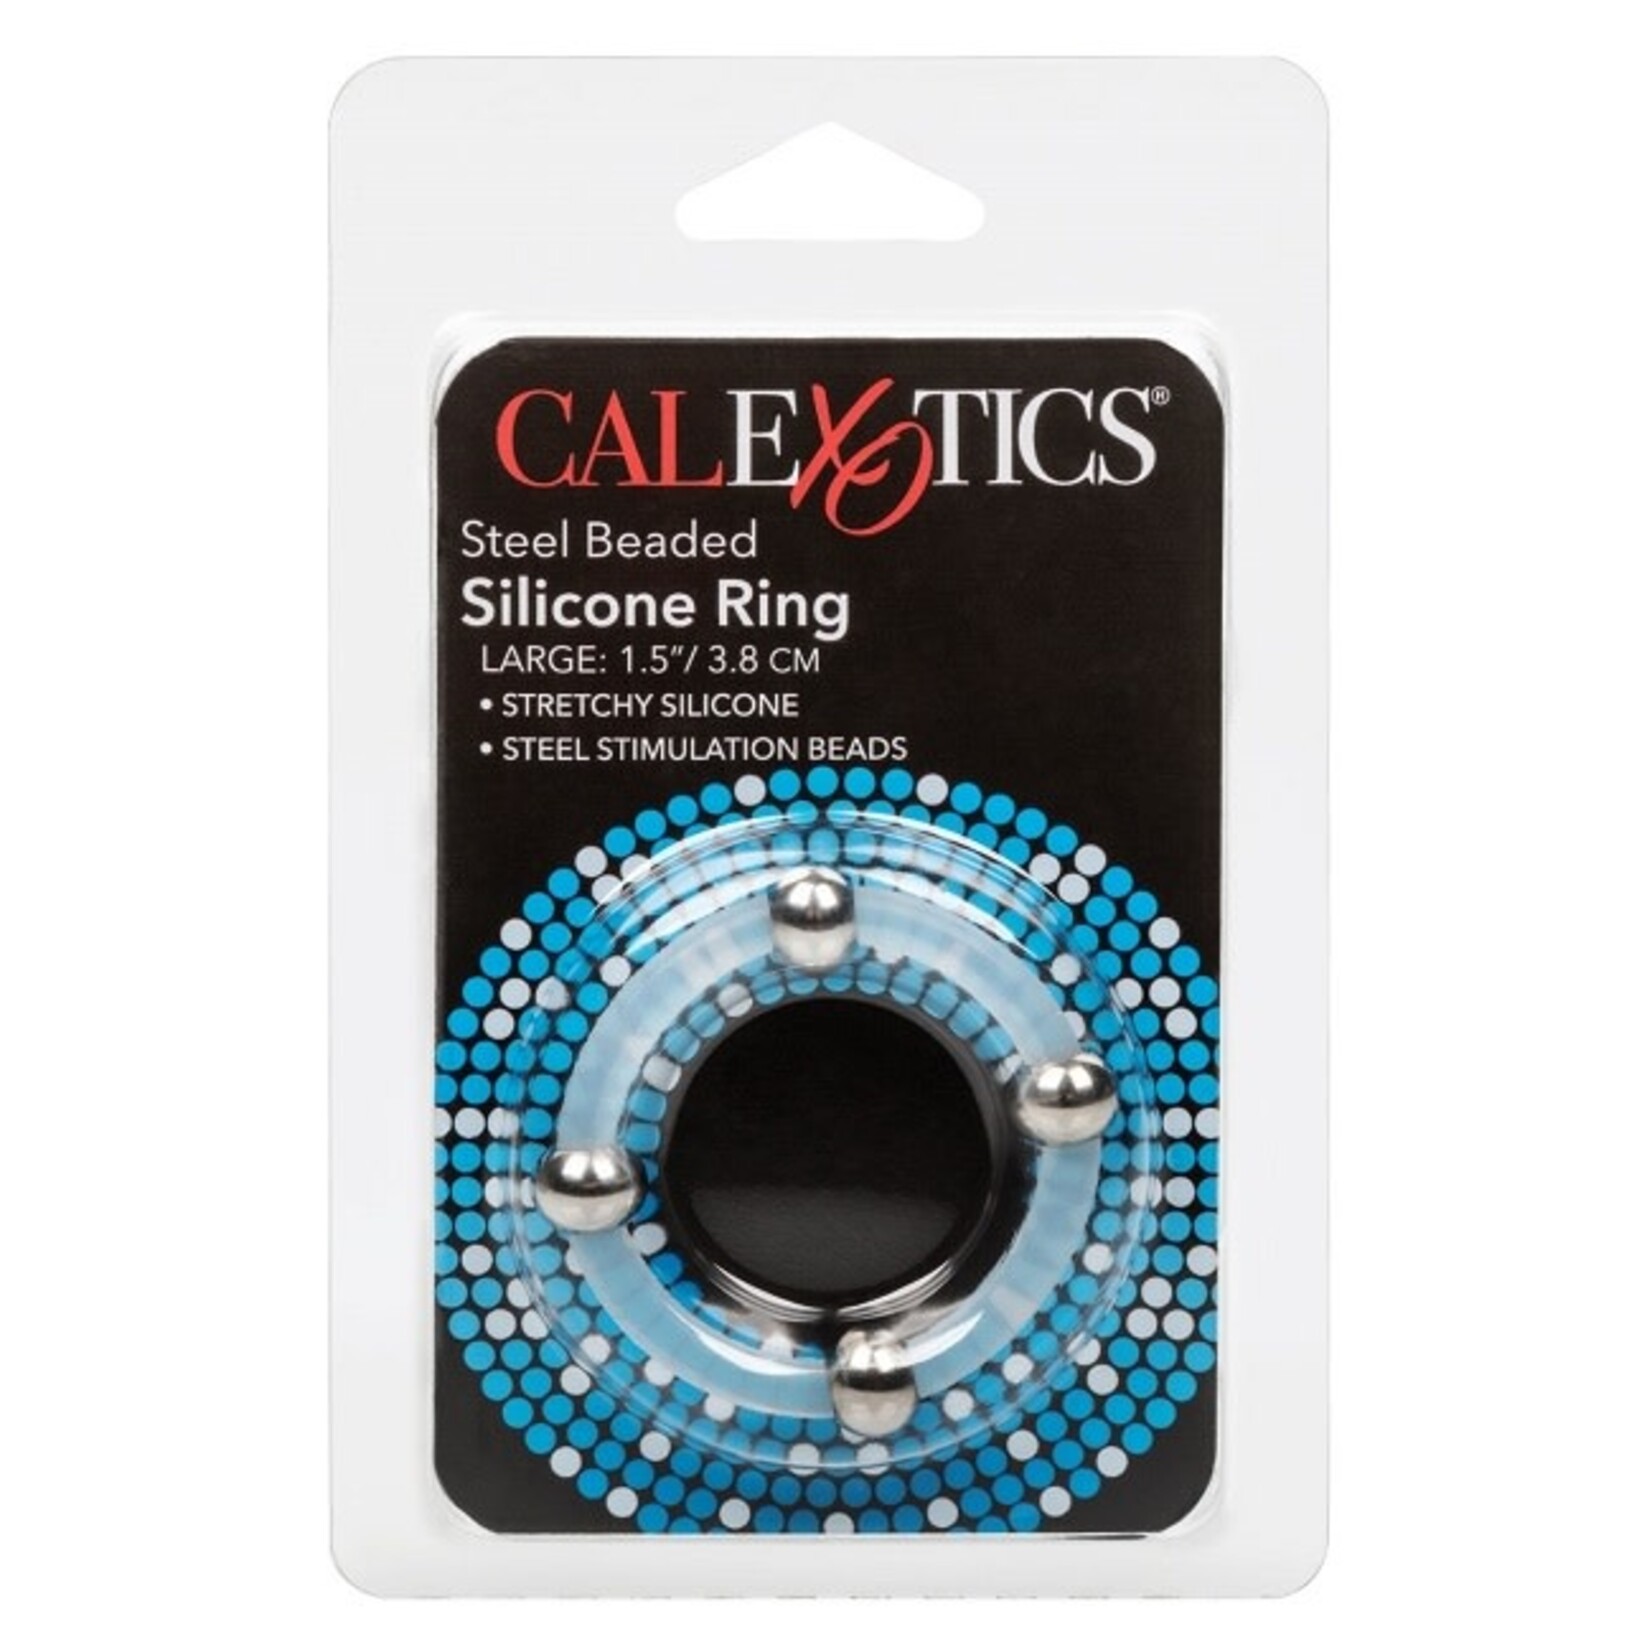 CalExotics Steel Beaded Silicone Ring - Large